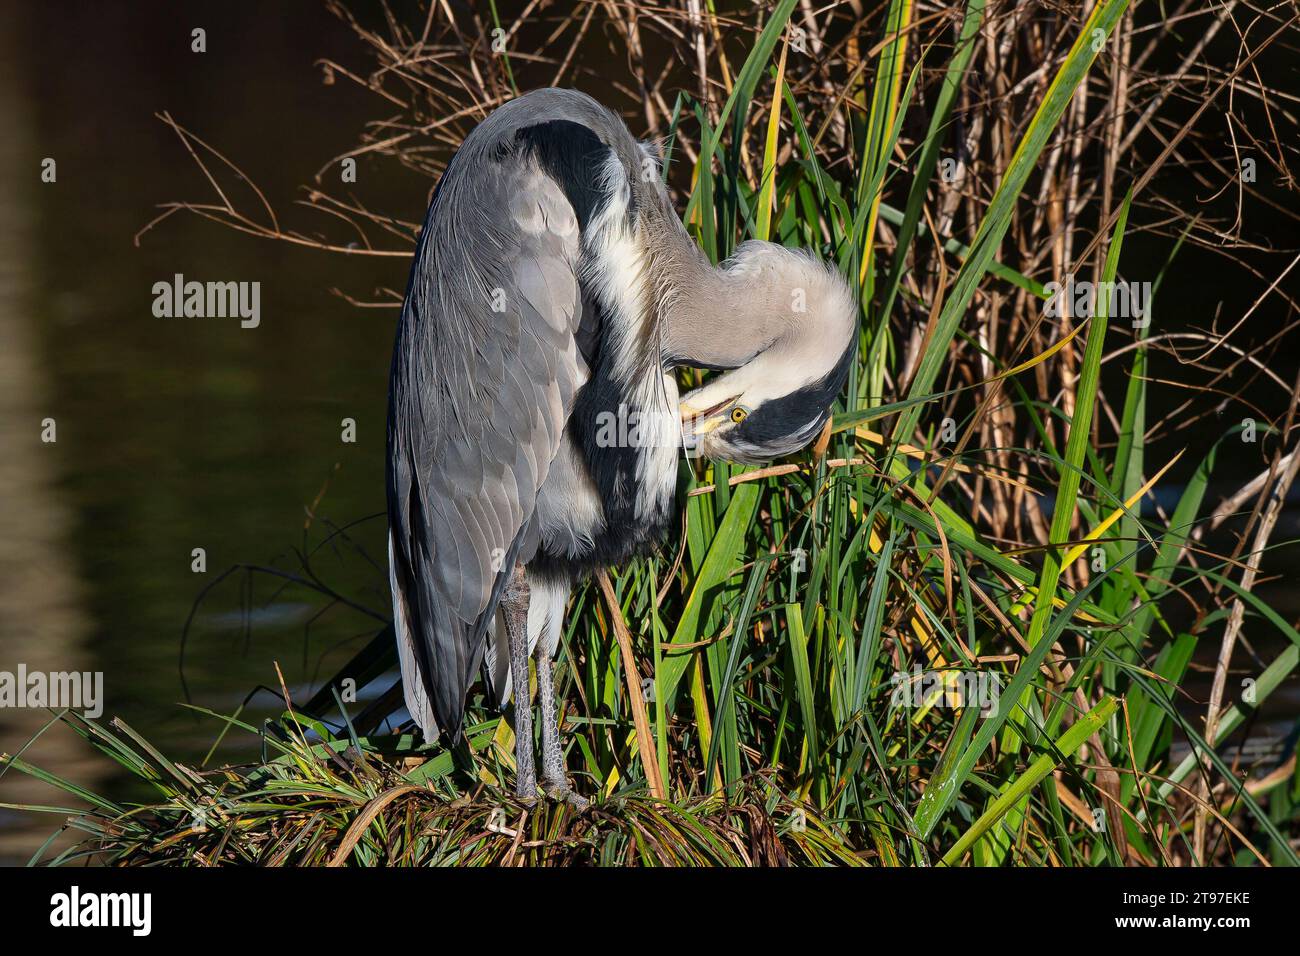 Kidderminster, UK. 23rd November, 2023. UK weather: The local wildlife enjoys a bright sunny autumn day across the Midlands. A preening grey heron enjoys the welcome sunshine at a local park. Kidderminster, UK. Credit: Lee Hudson/Alamy Live News Stock Photo